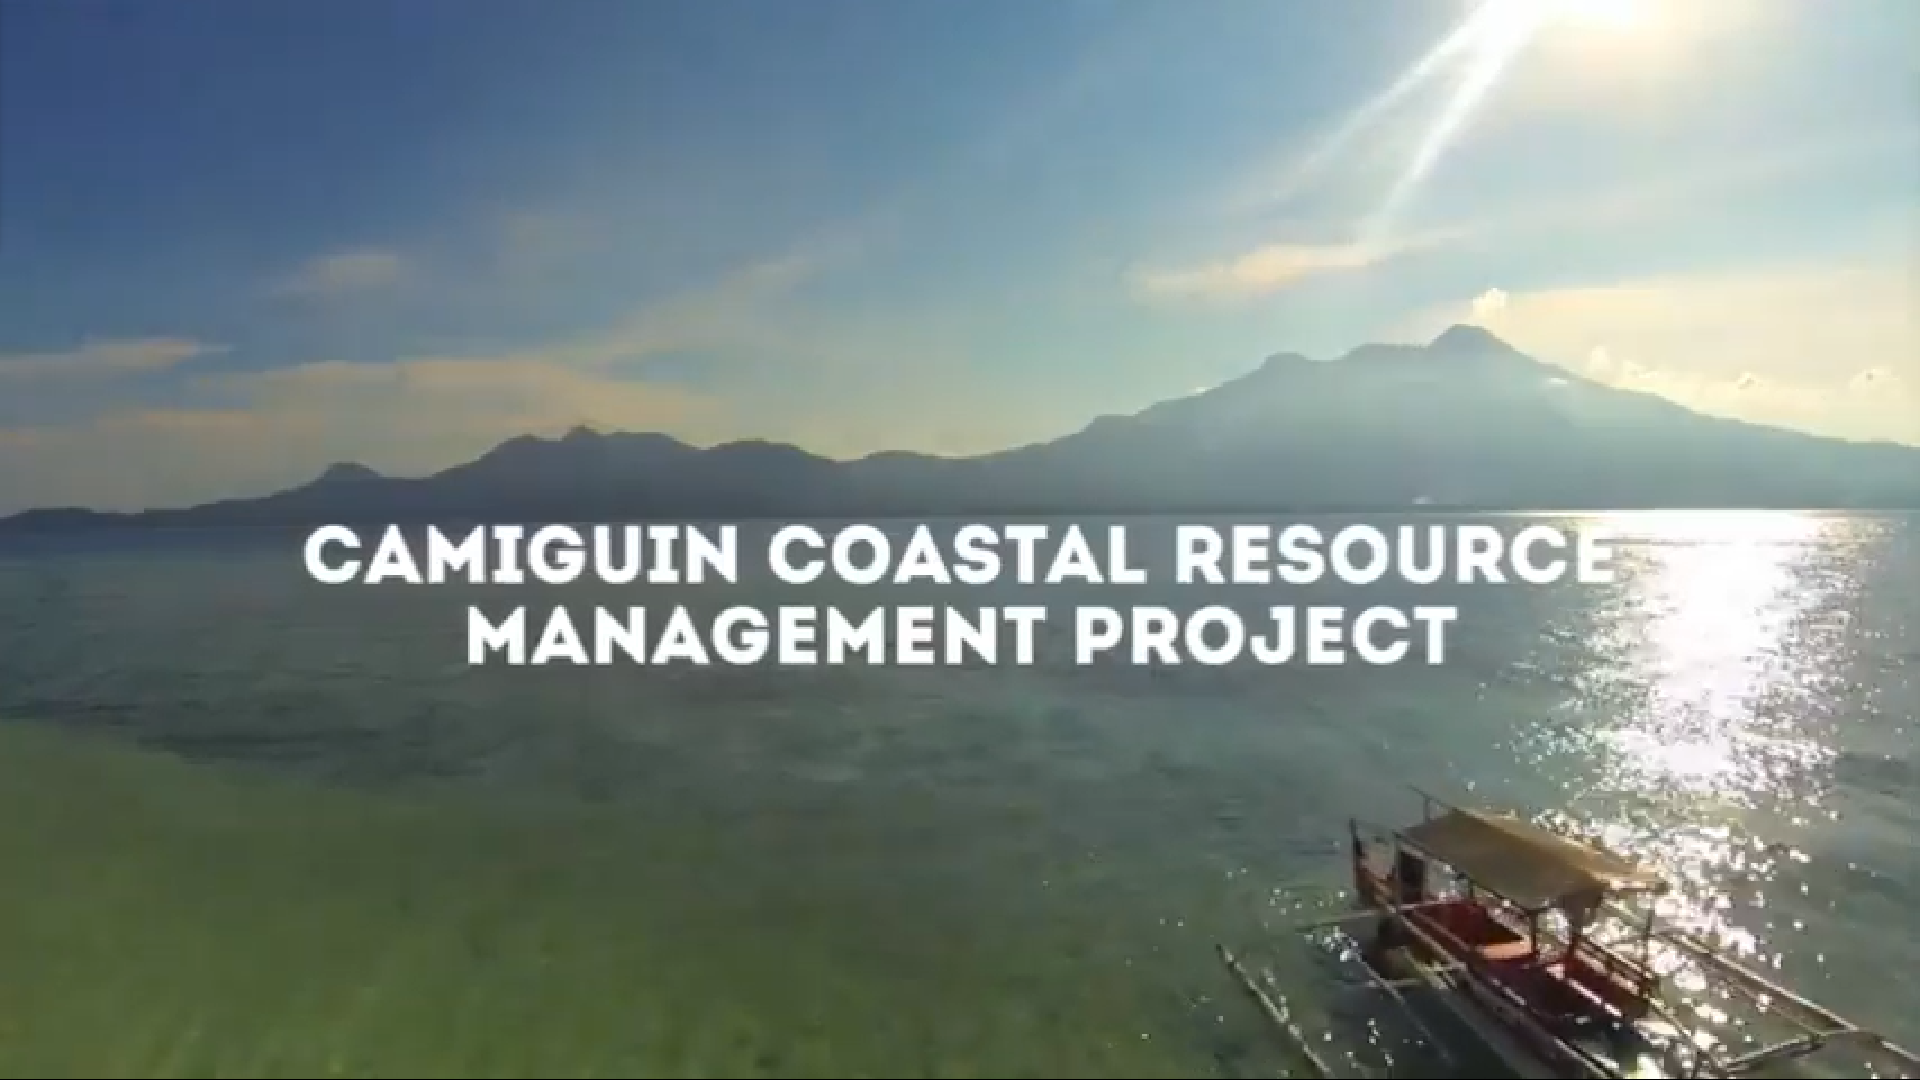 Watch the video highlights of the Camiguin Coastal Resource Management Project